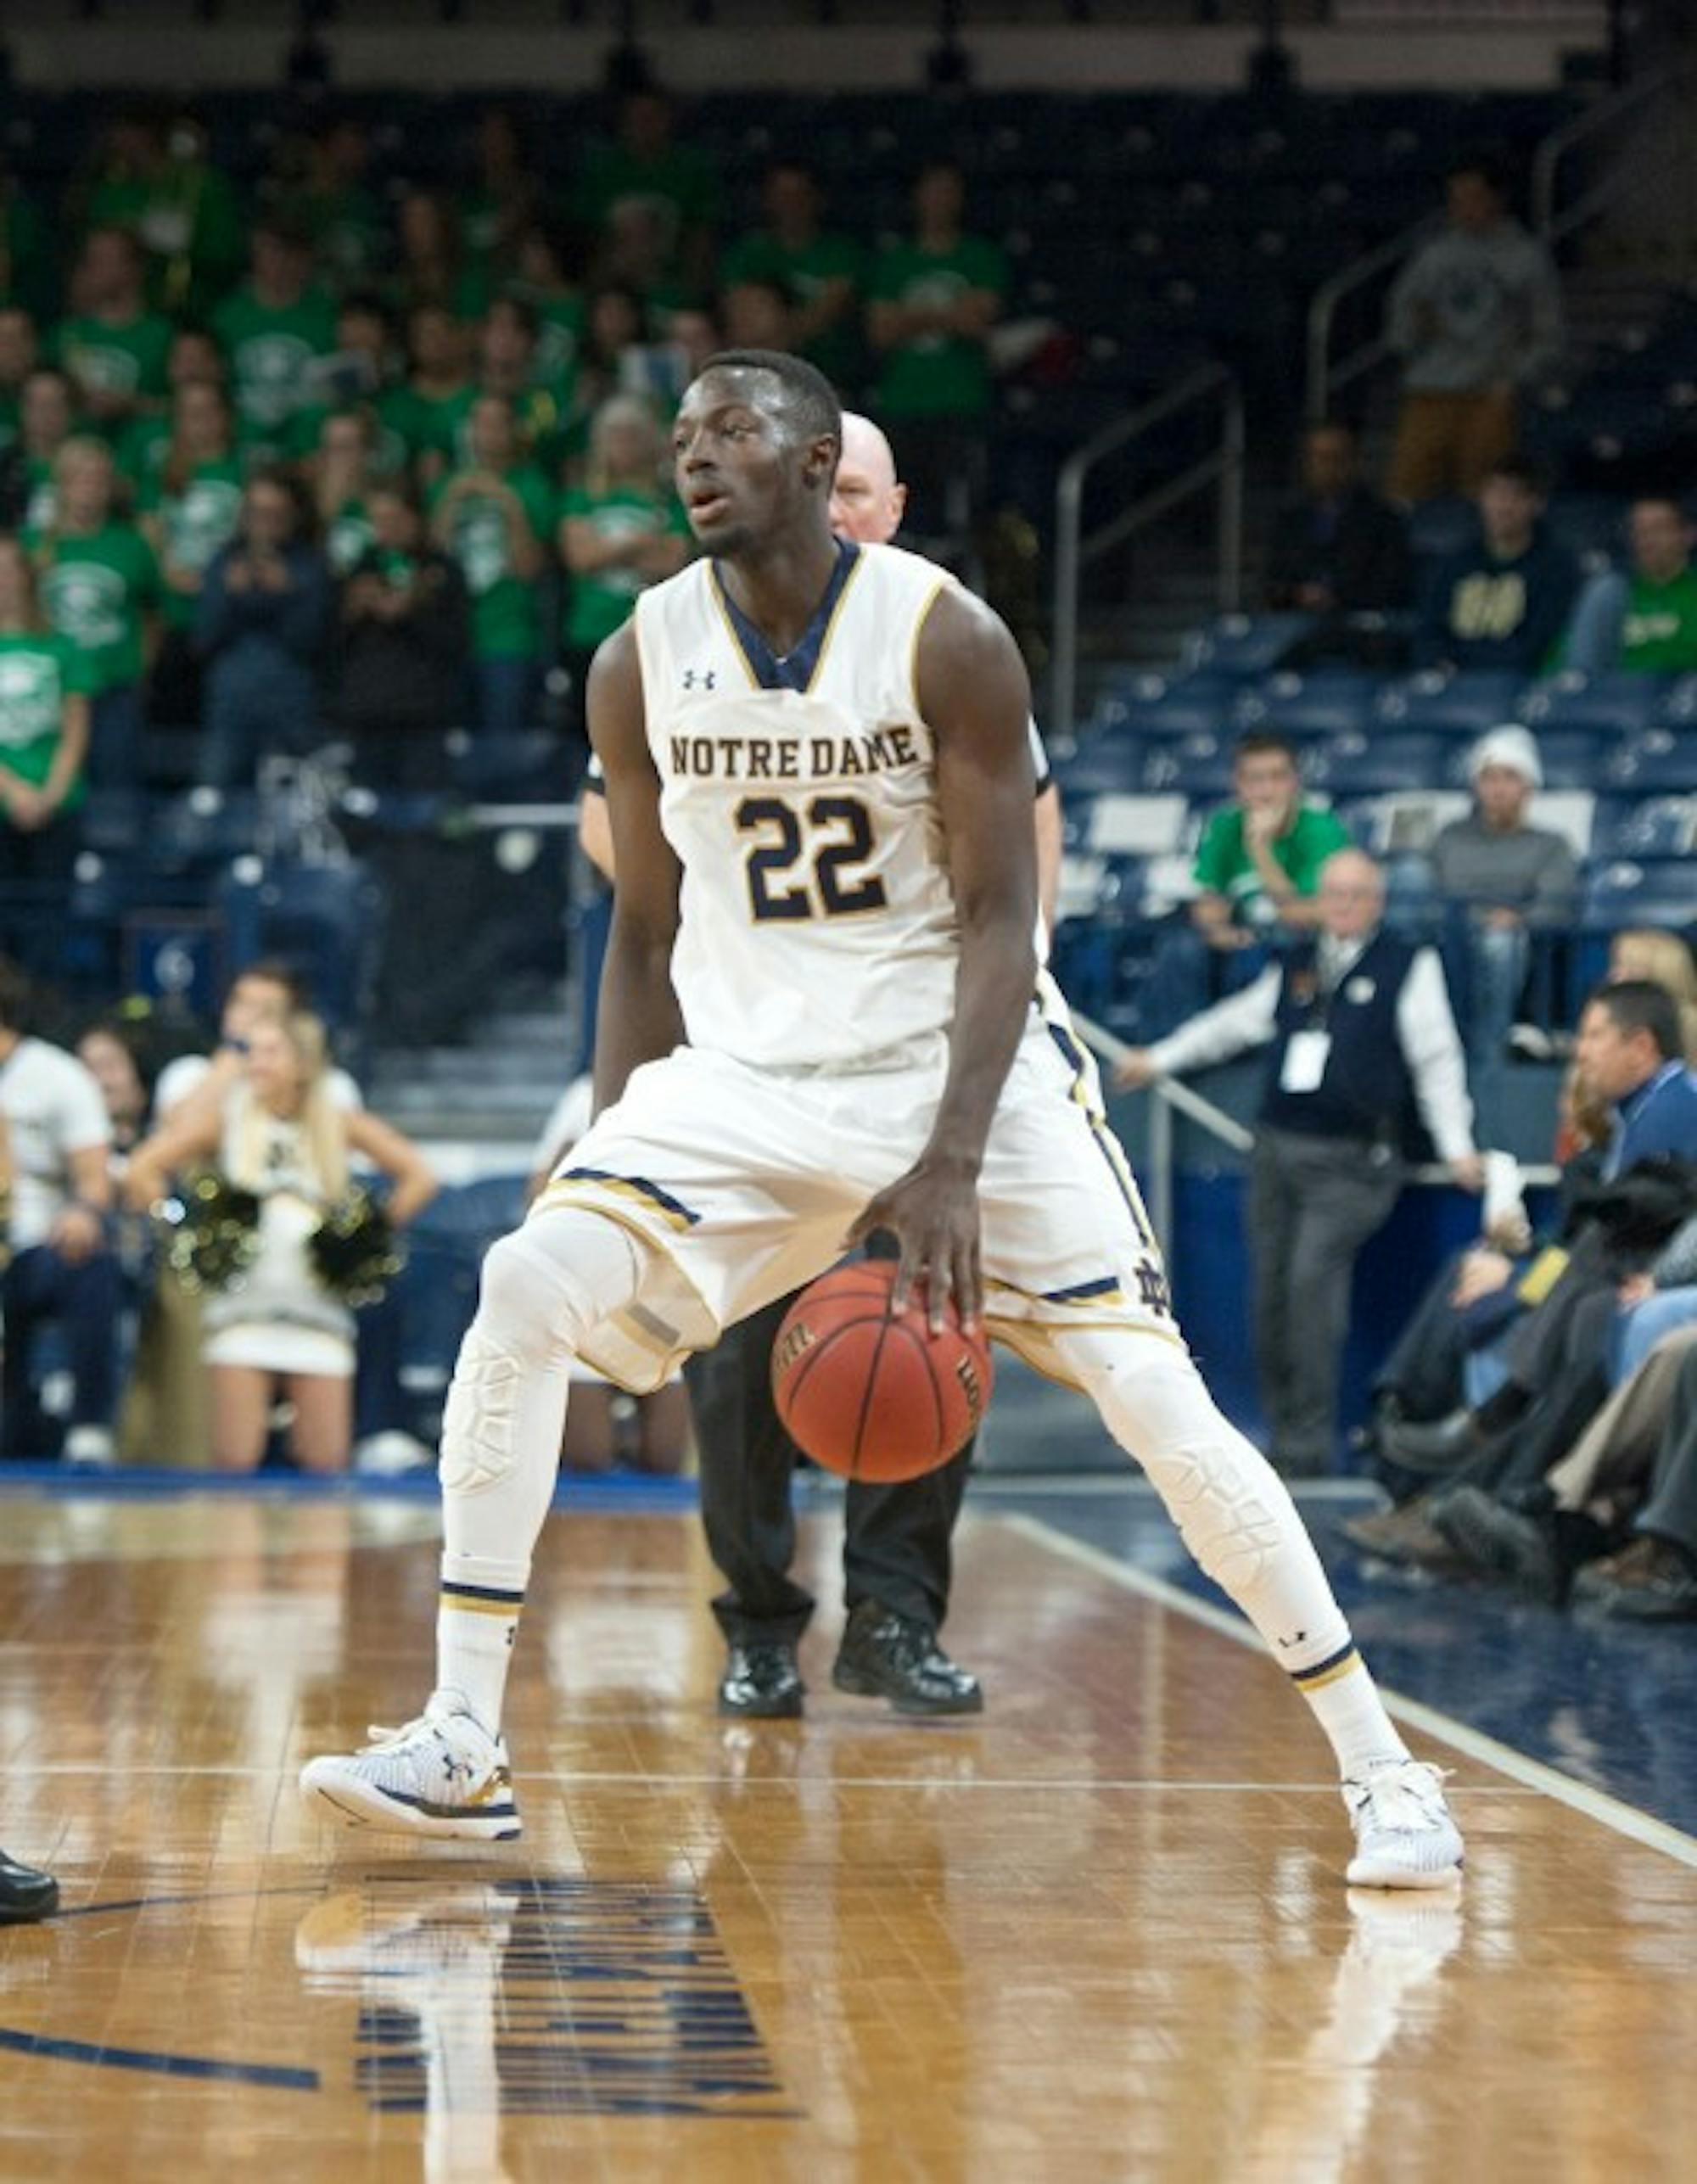 Irish senior guard Jerian Grant performs a crossover dribble during Notre Dame’s 104-67 win over Coppin State on Nov. 19. Grant matched a career high with 26 points in Saturday’s 90-42 win over Chicago State.